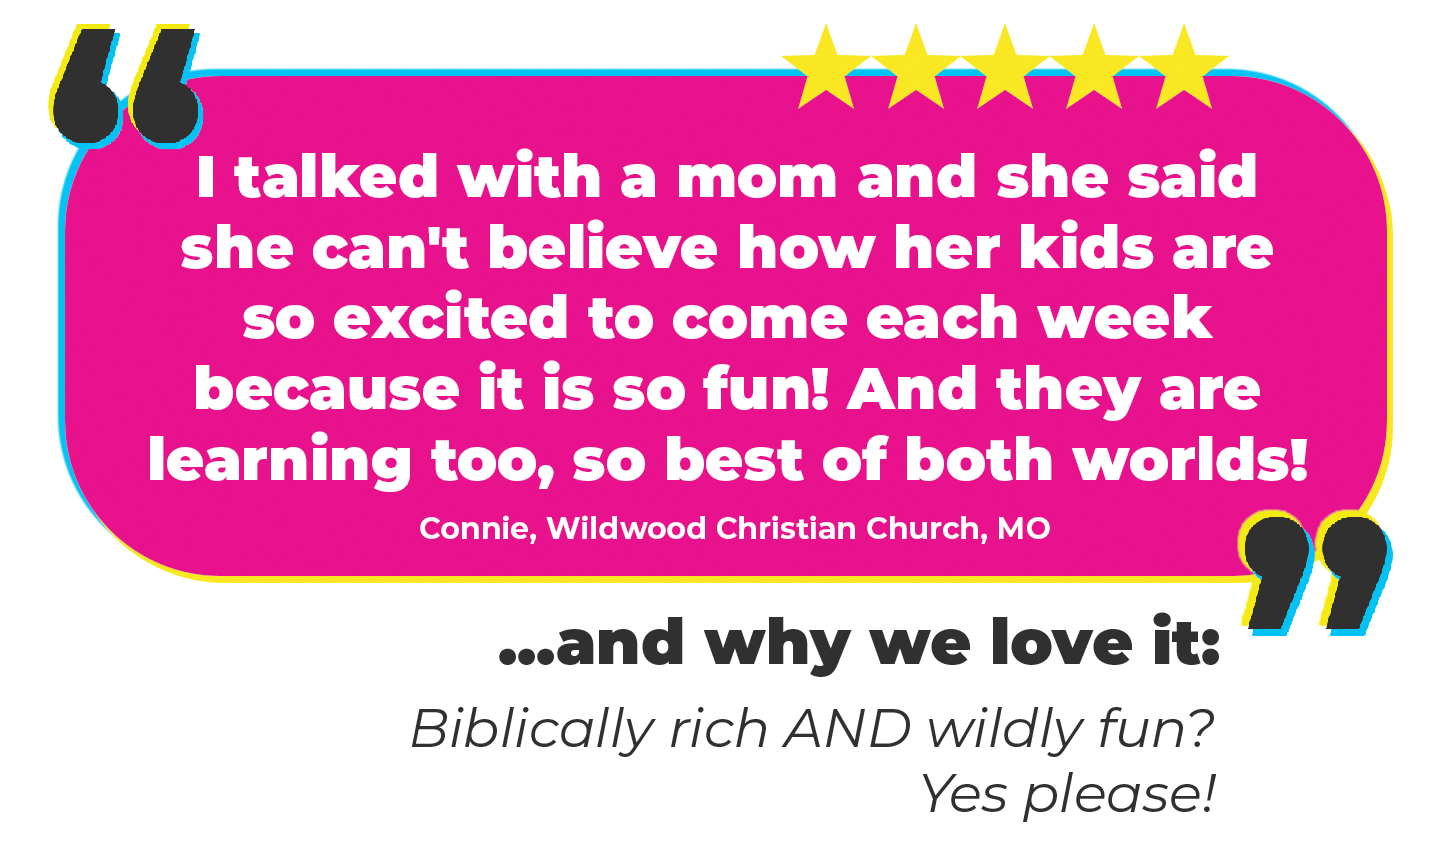 “I talked with a mom and she said she can't believe how her kids are so excited to come each week because it is so fun! And they are learning too, so best of both worlds!” Connie, Wildwood Christian Church, MO Why we love it: Biblically rich AND wildly fun? Yes please!